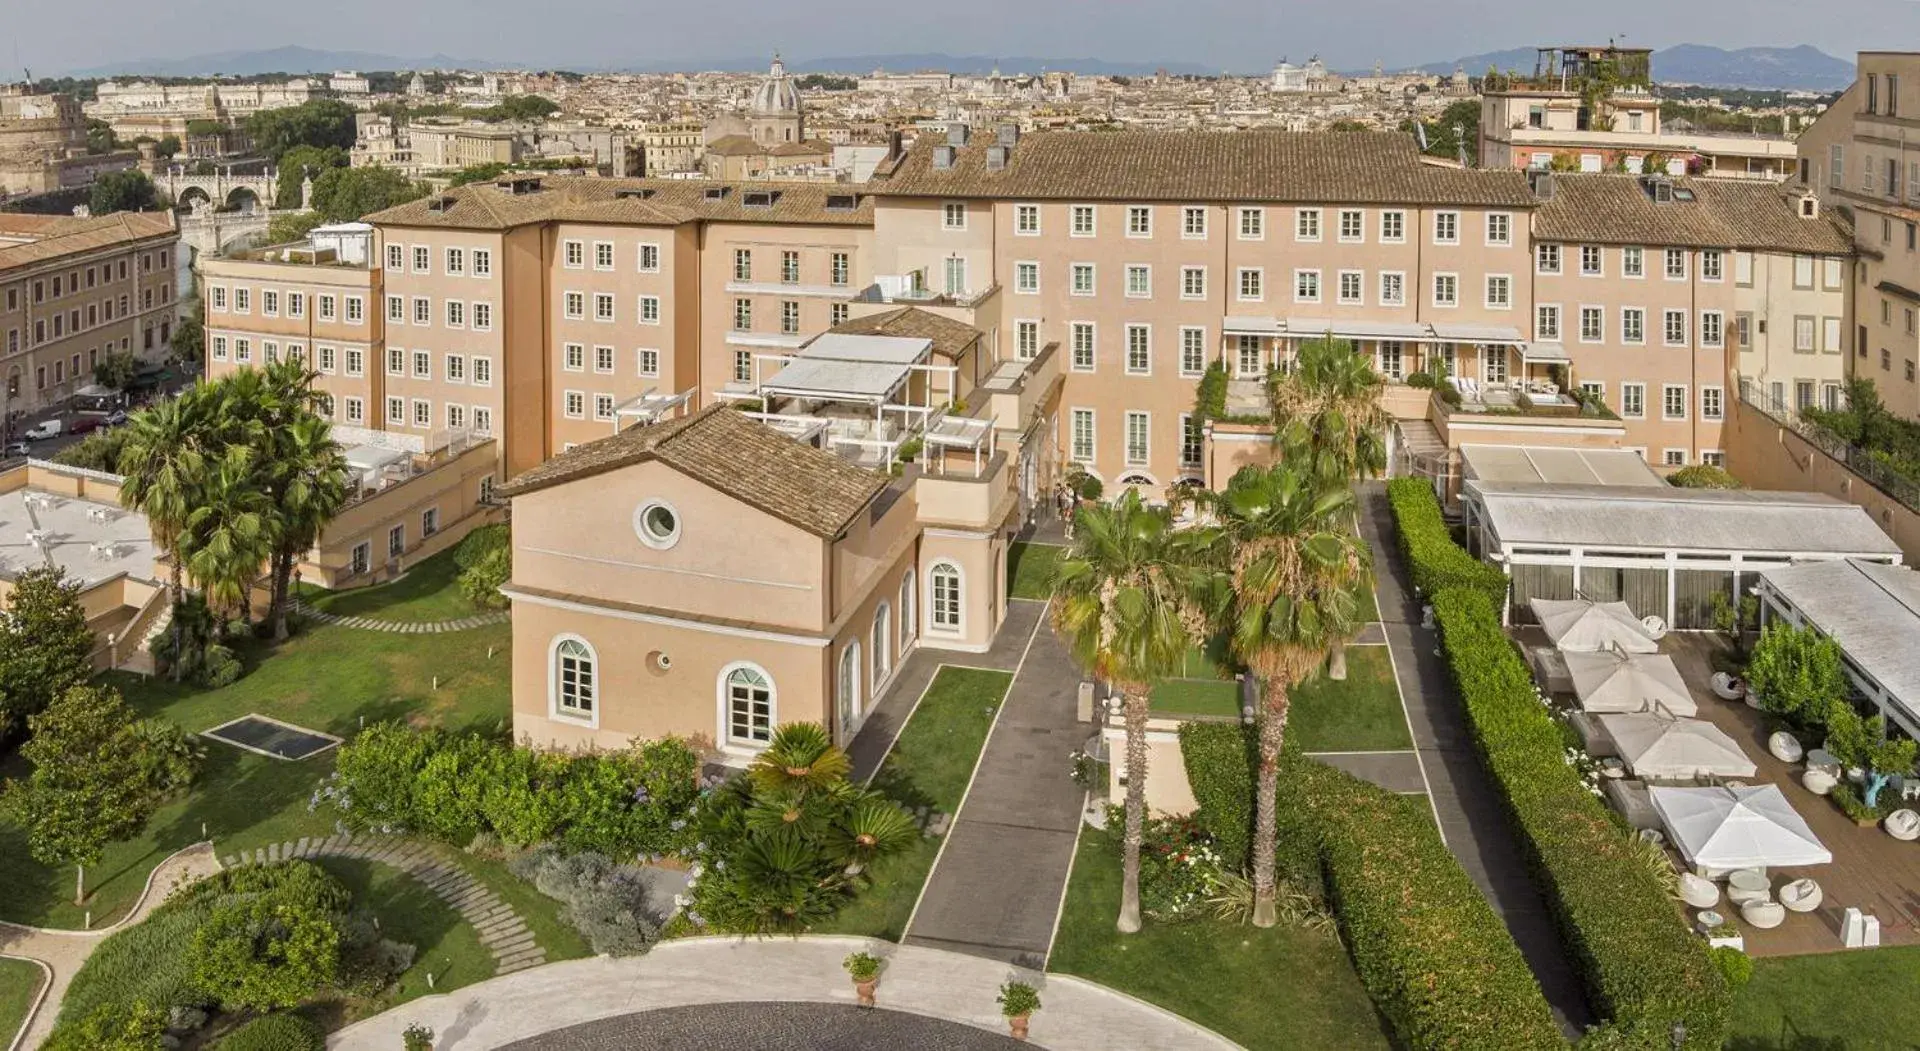 Off site, Bird's-eye View in Villa Agrippina Gran Meliá - The Leading Hotels of the World